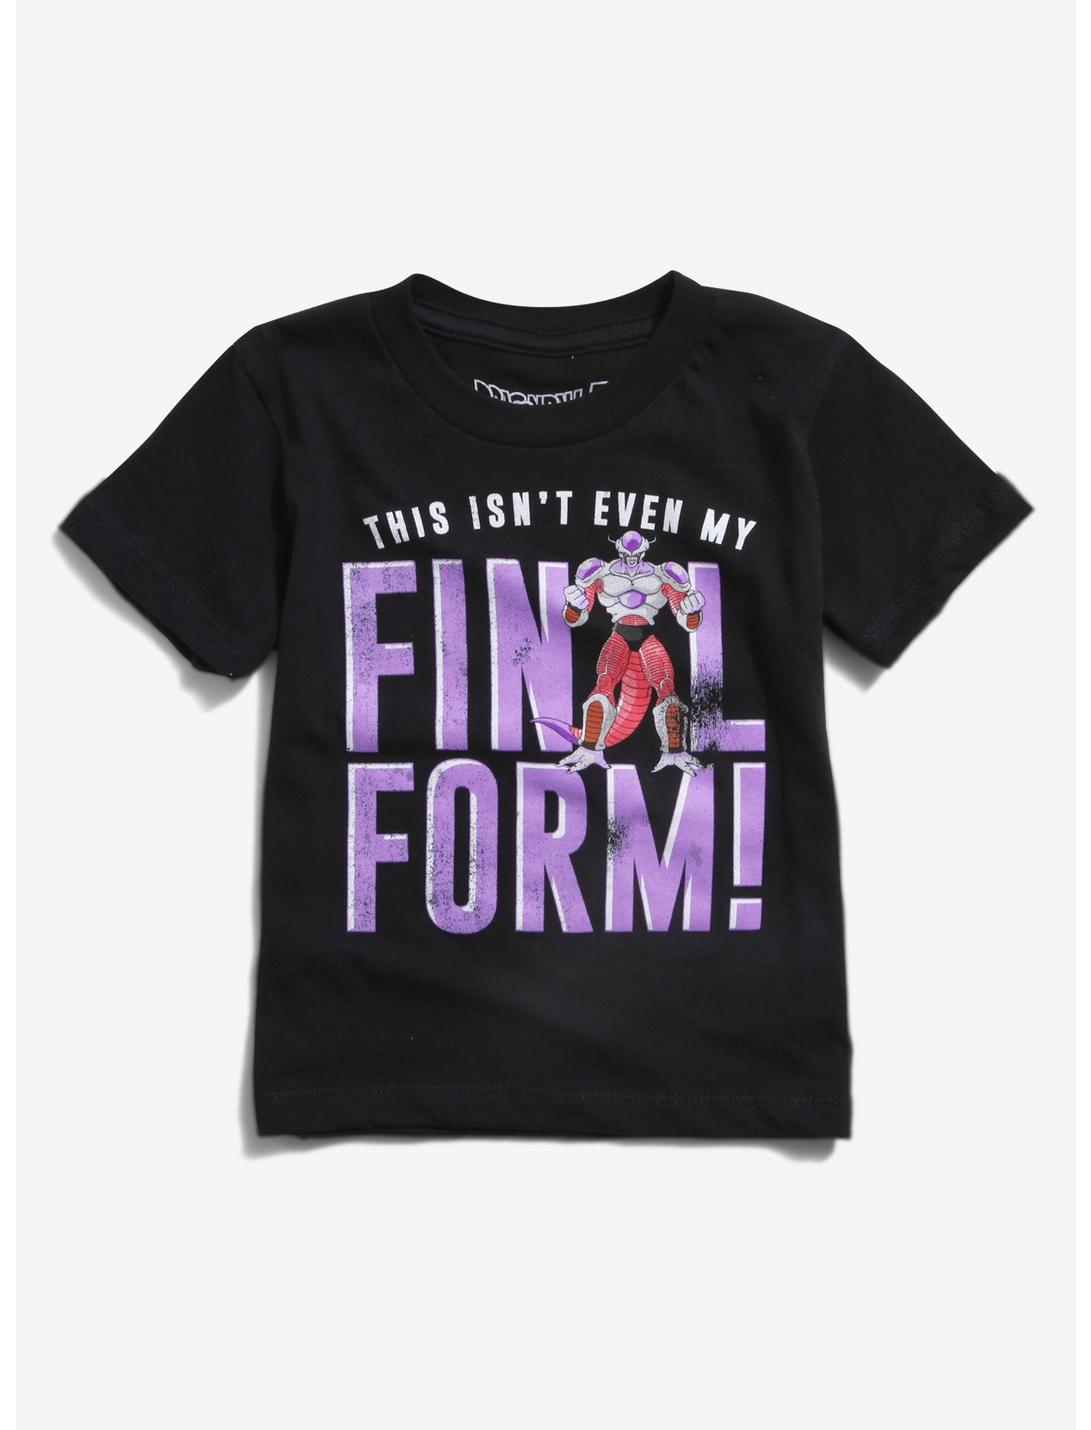 Dragon Ball Z This Isn’t Even My Final Form Toddler Tee, BLACK, hi-res